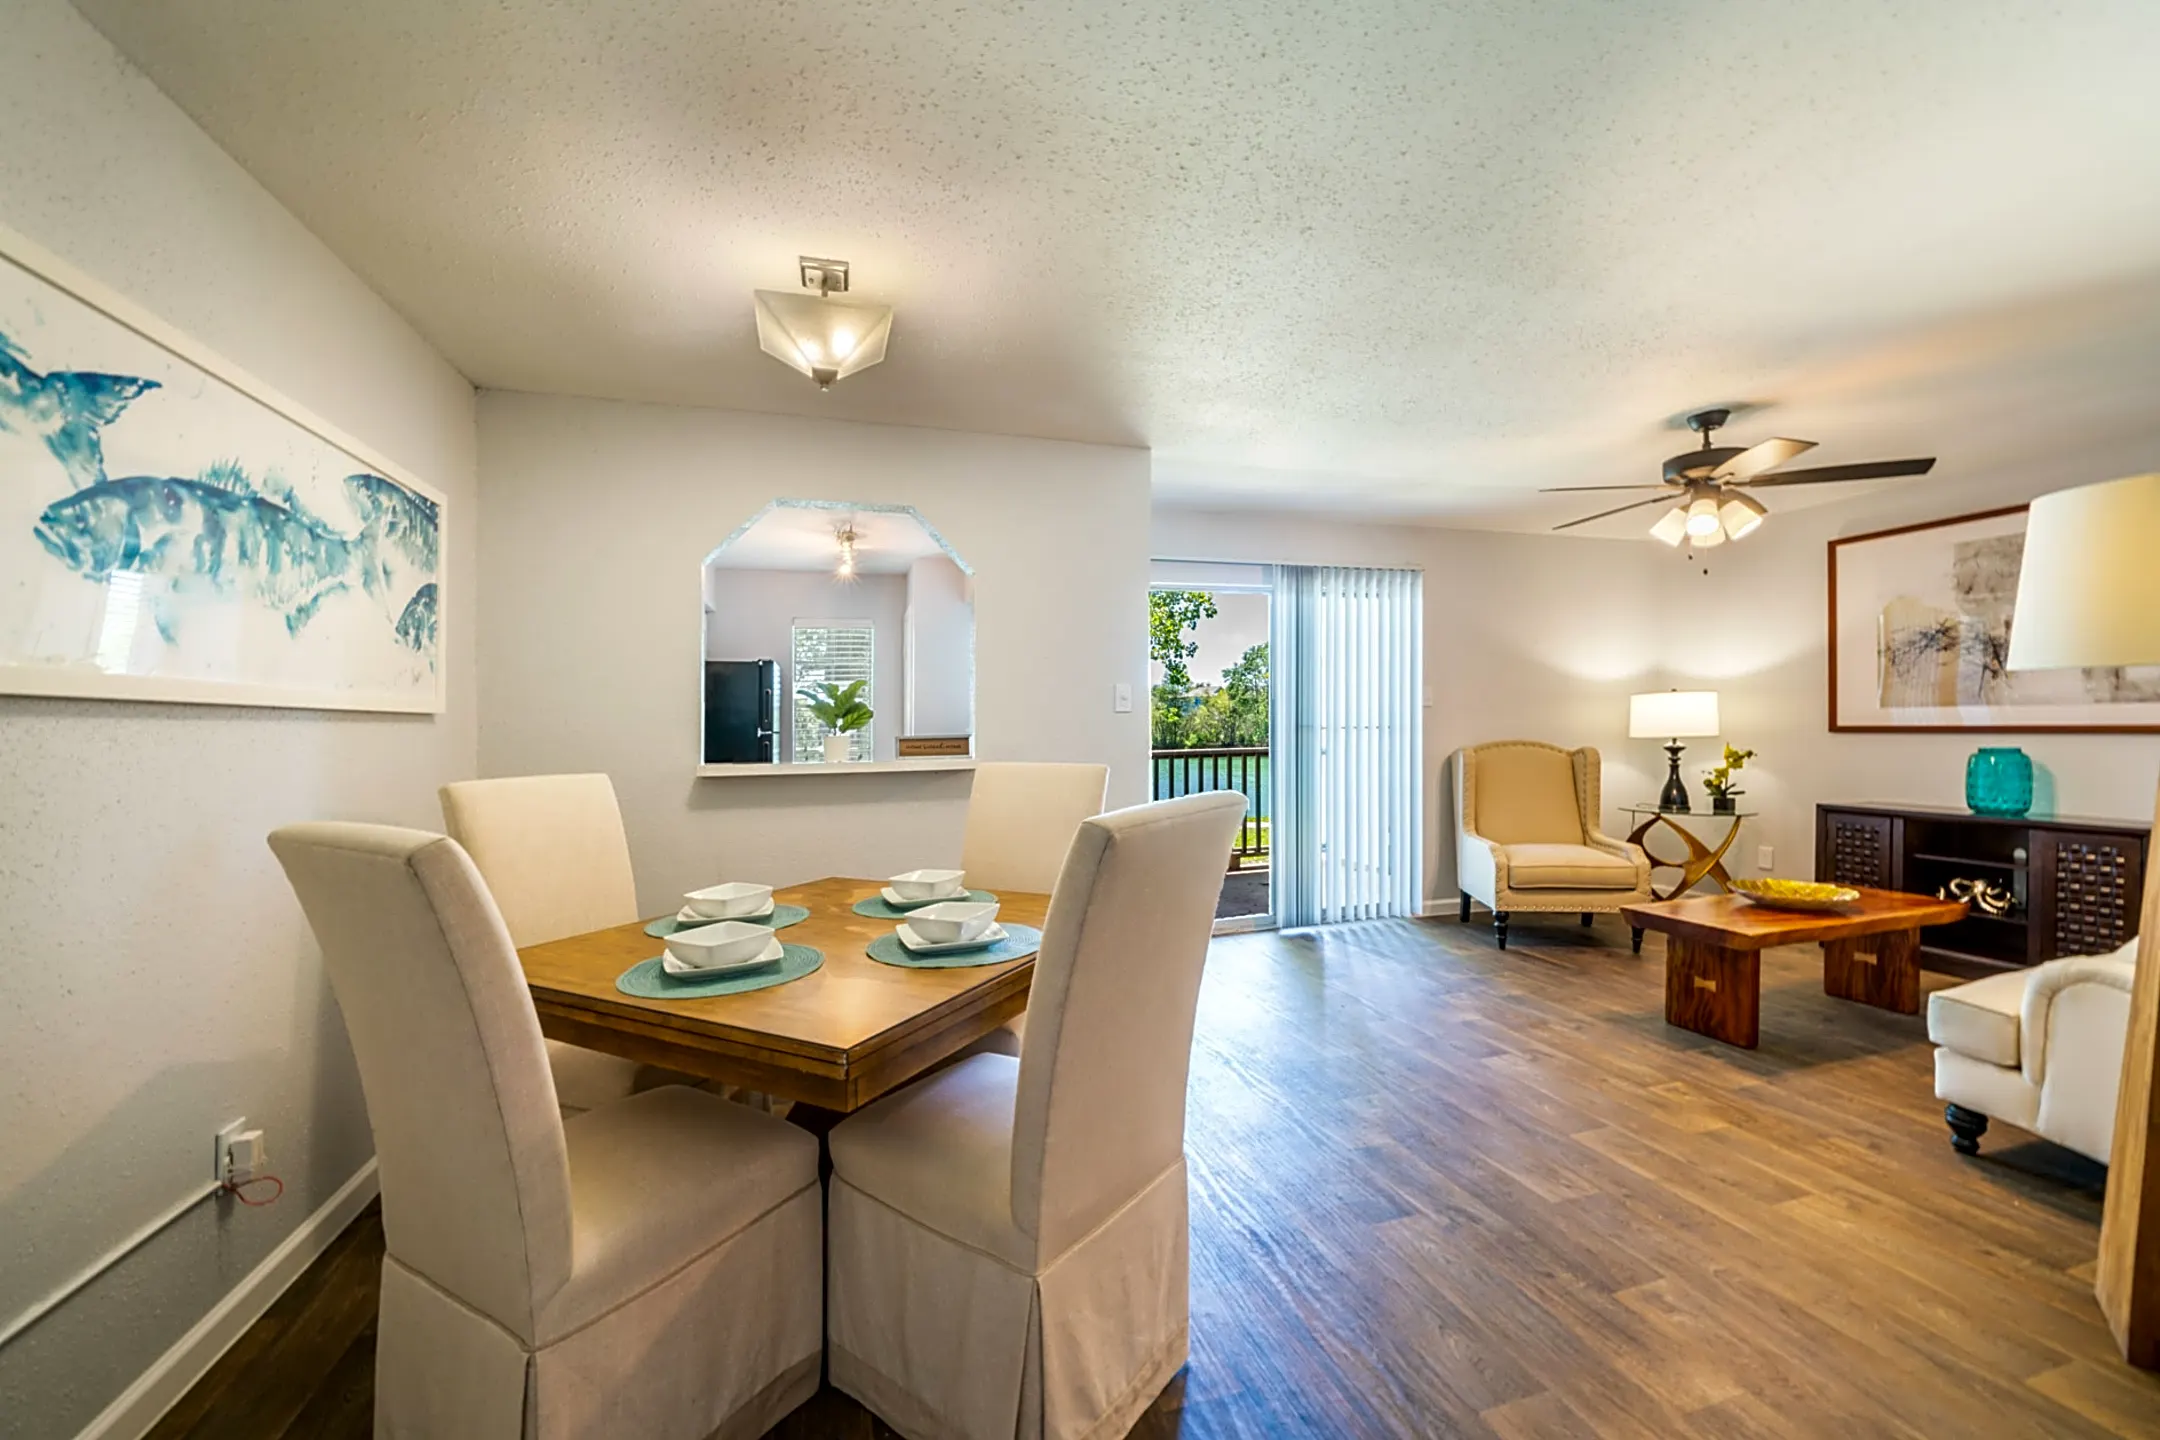 Dining Room - Waterside Apartments - Houston, TX